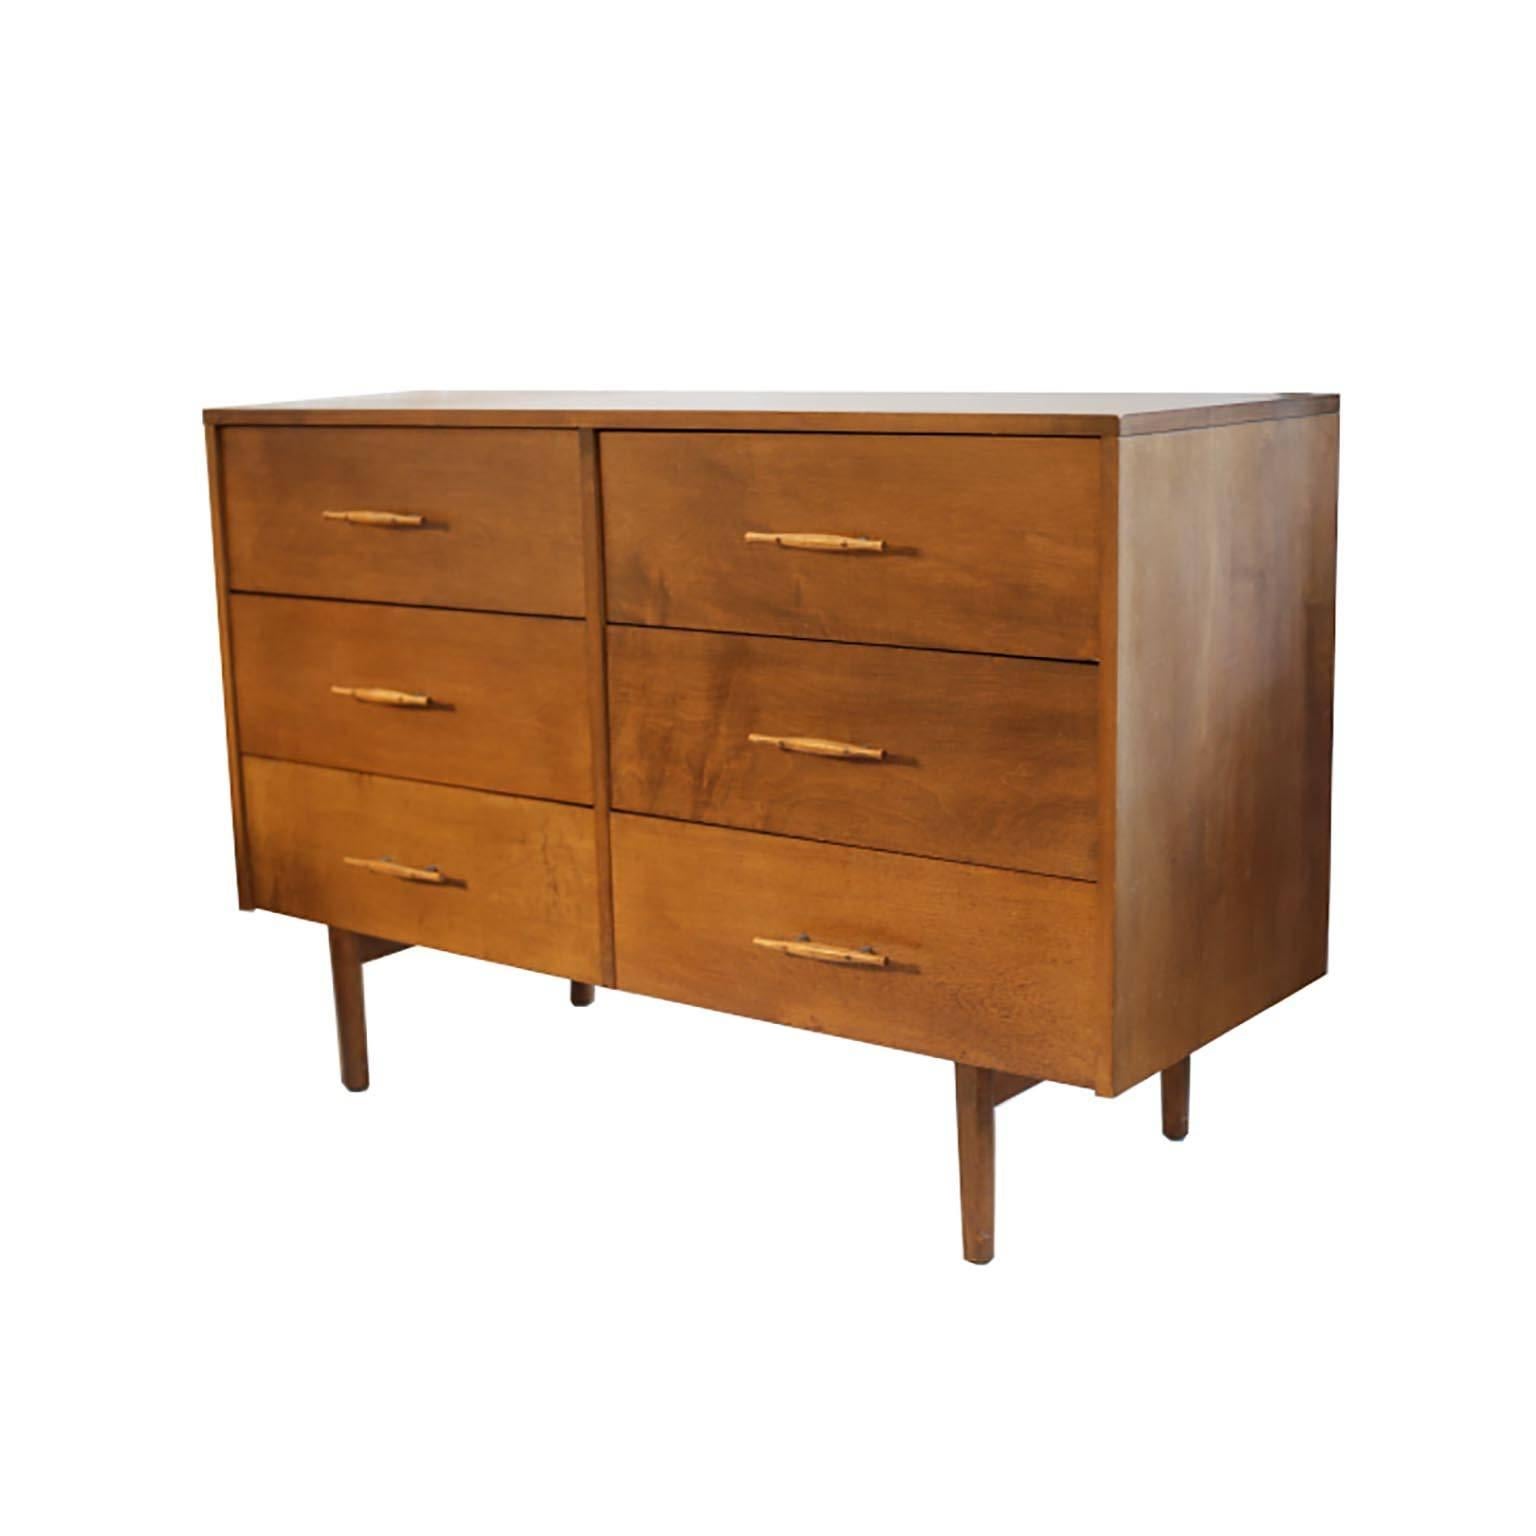 Teak six-drawer dresser with beautiful carved pulls by Paul McCobb Planner Group.